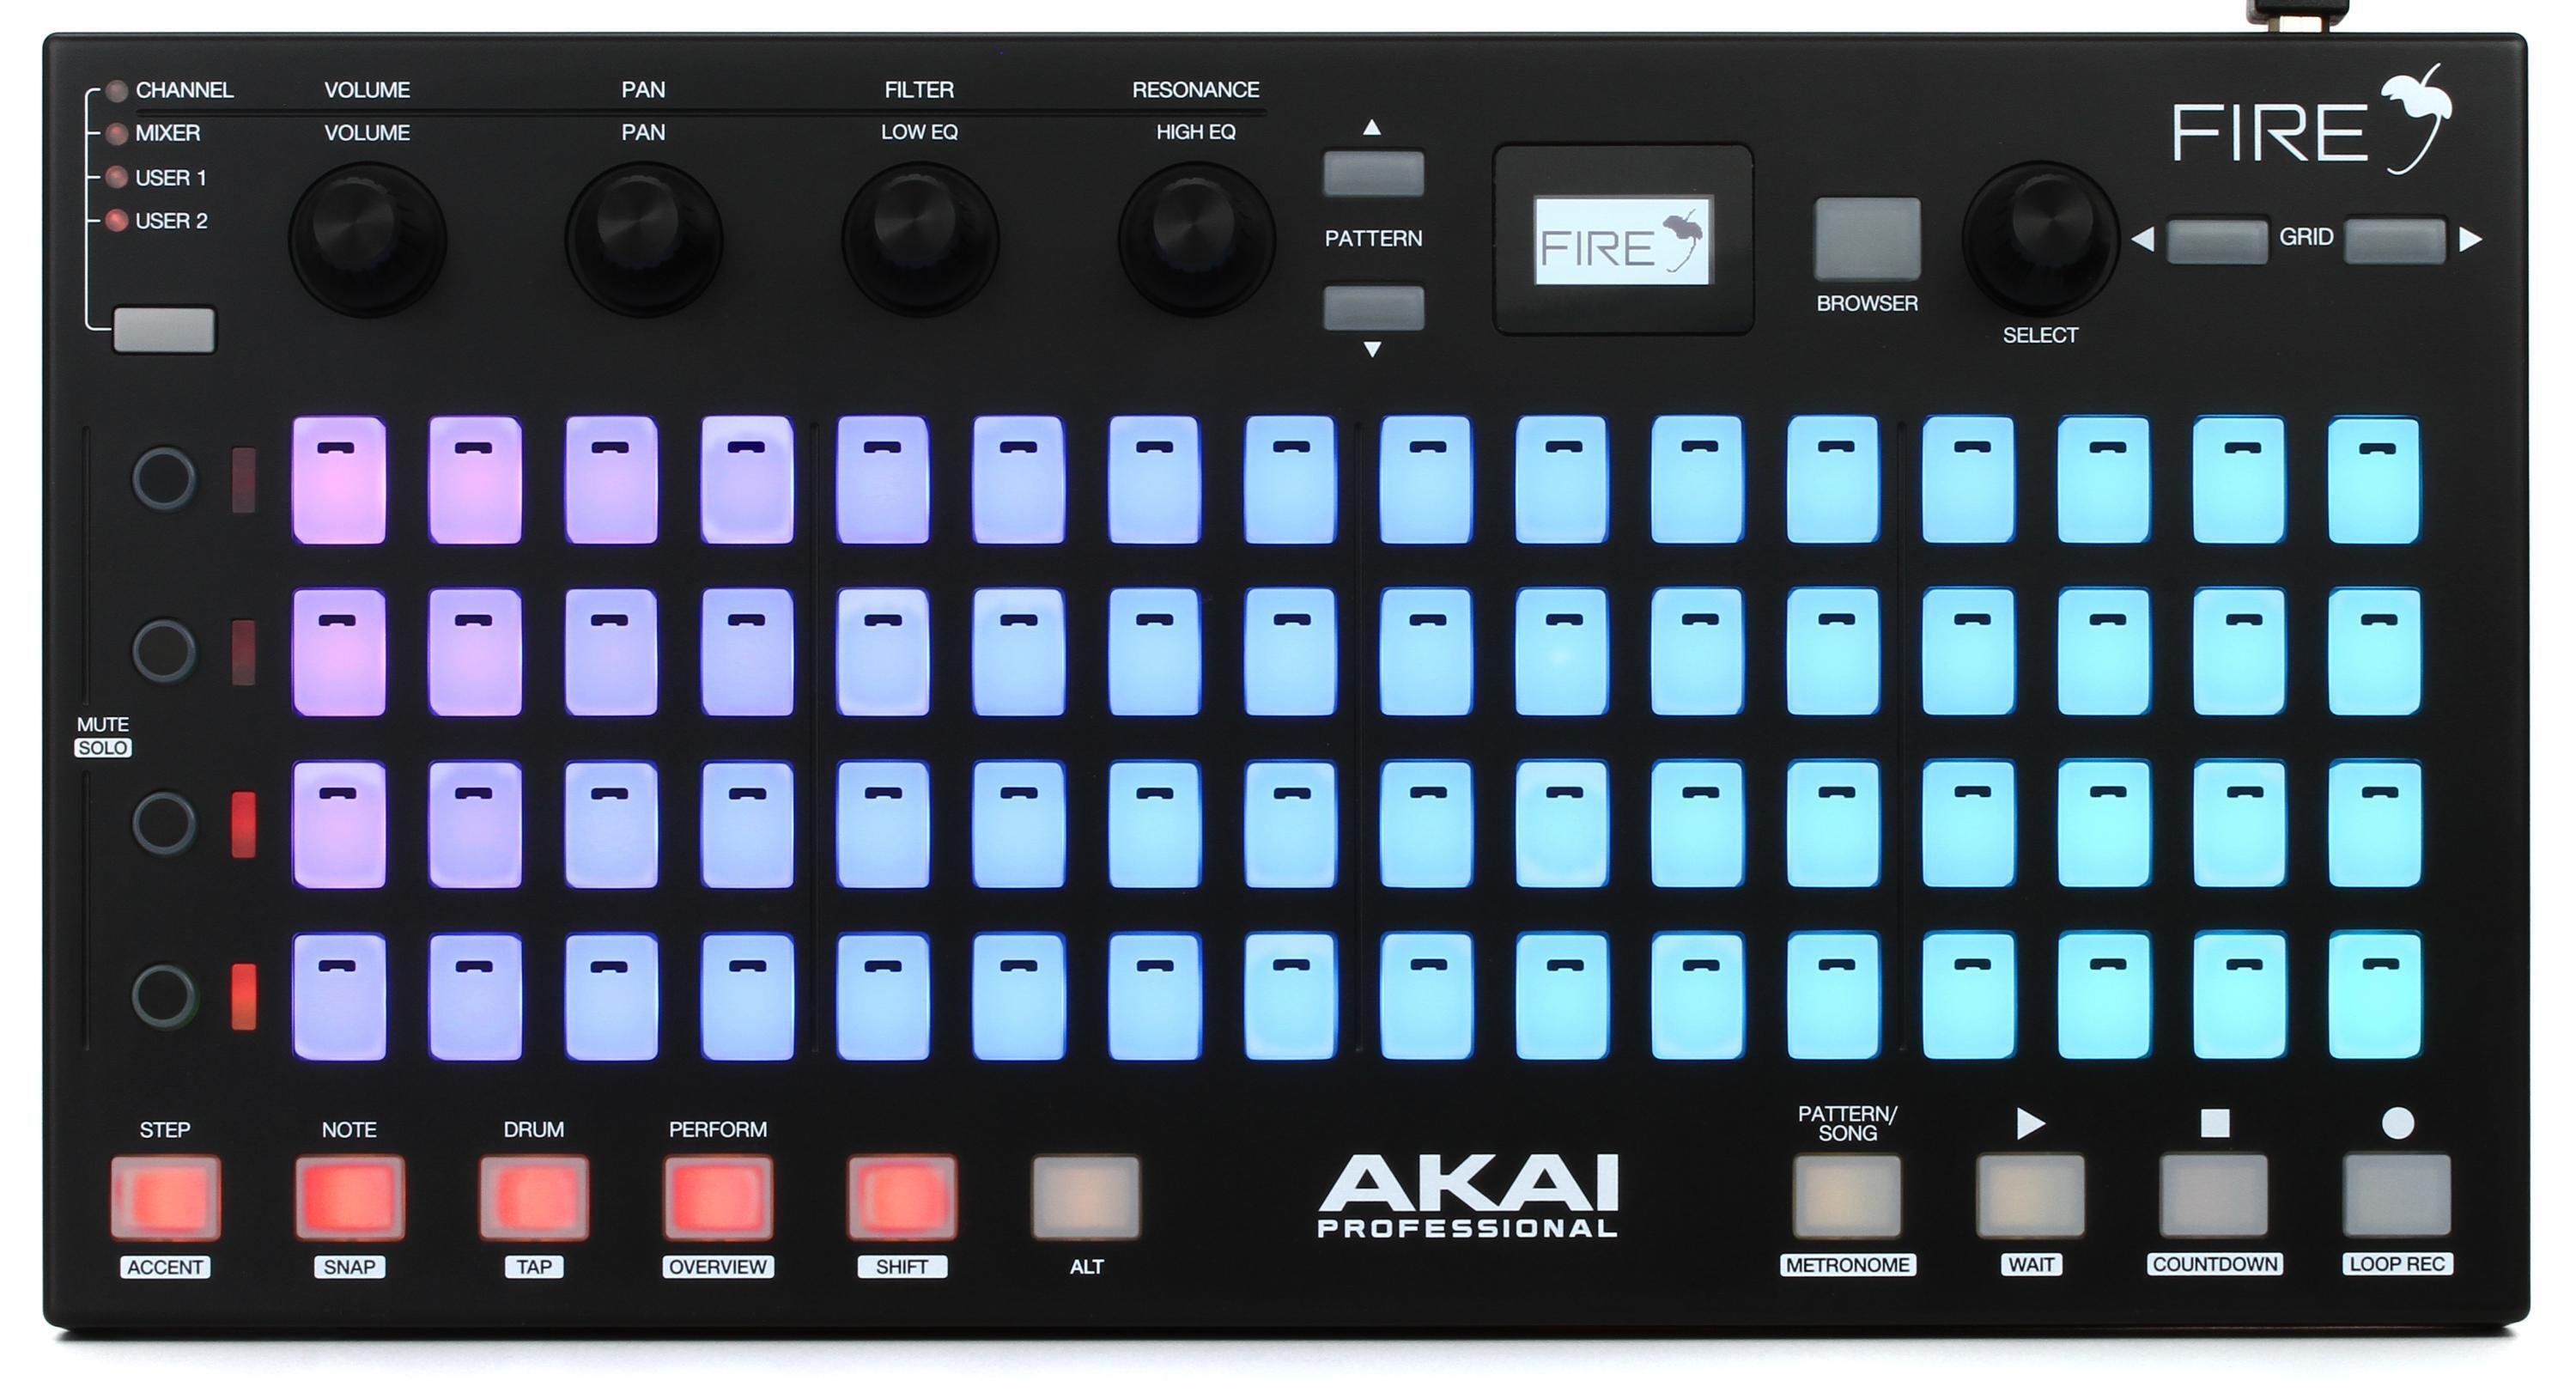 Bundled Item: Akai Professional Fire Grid Controller for FL Studio (No Software Included)